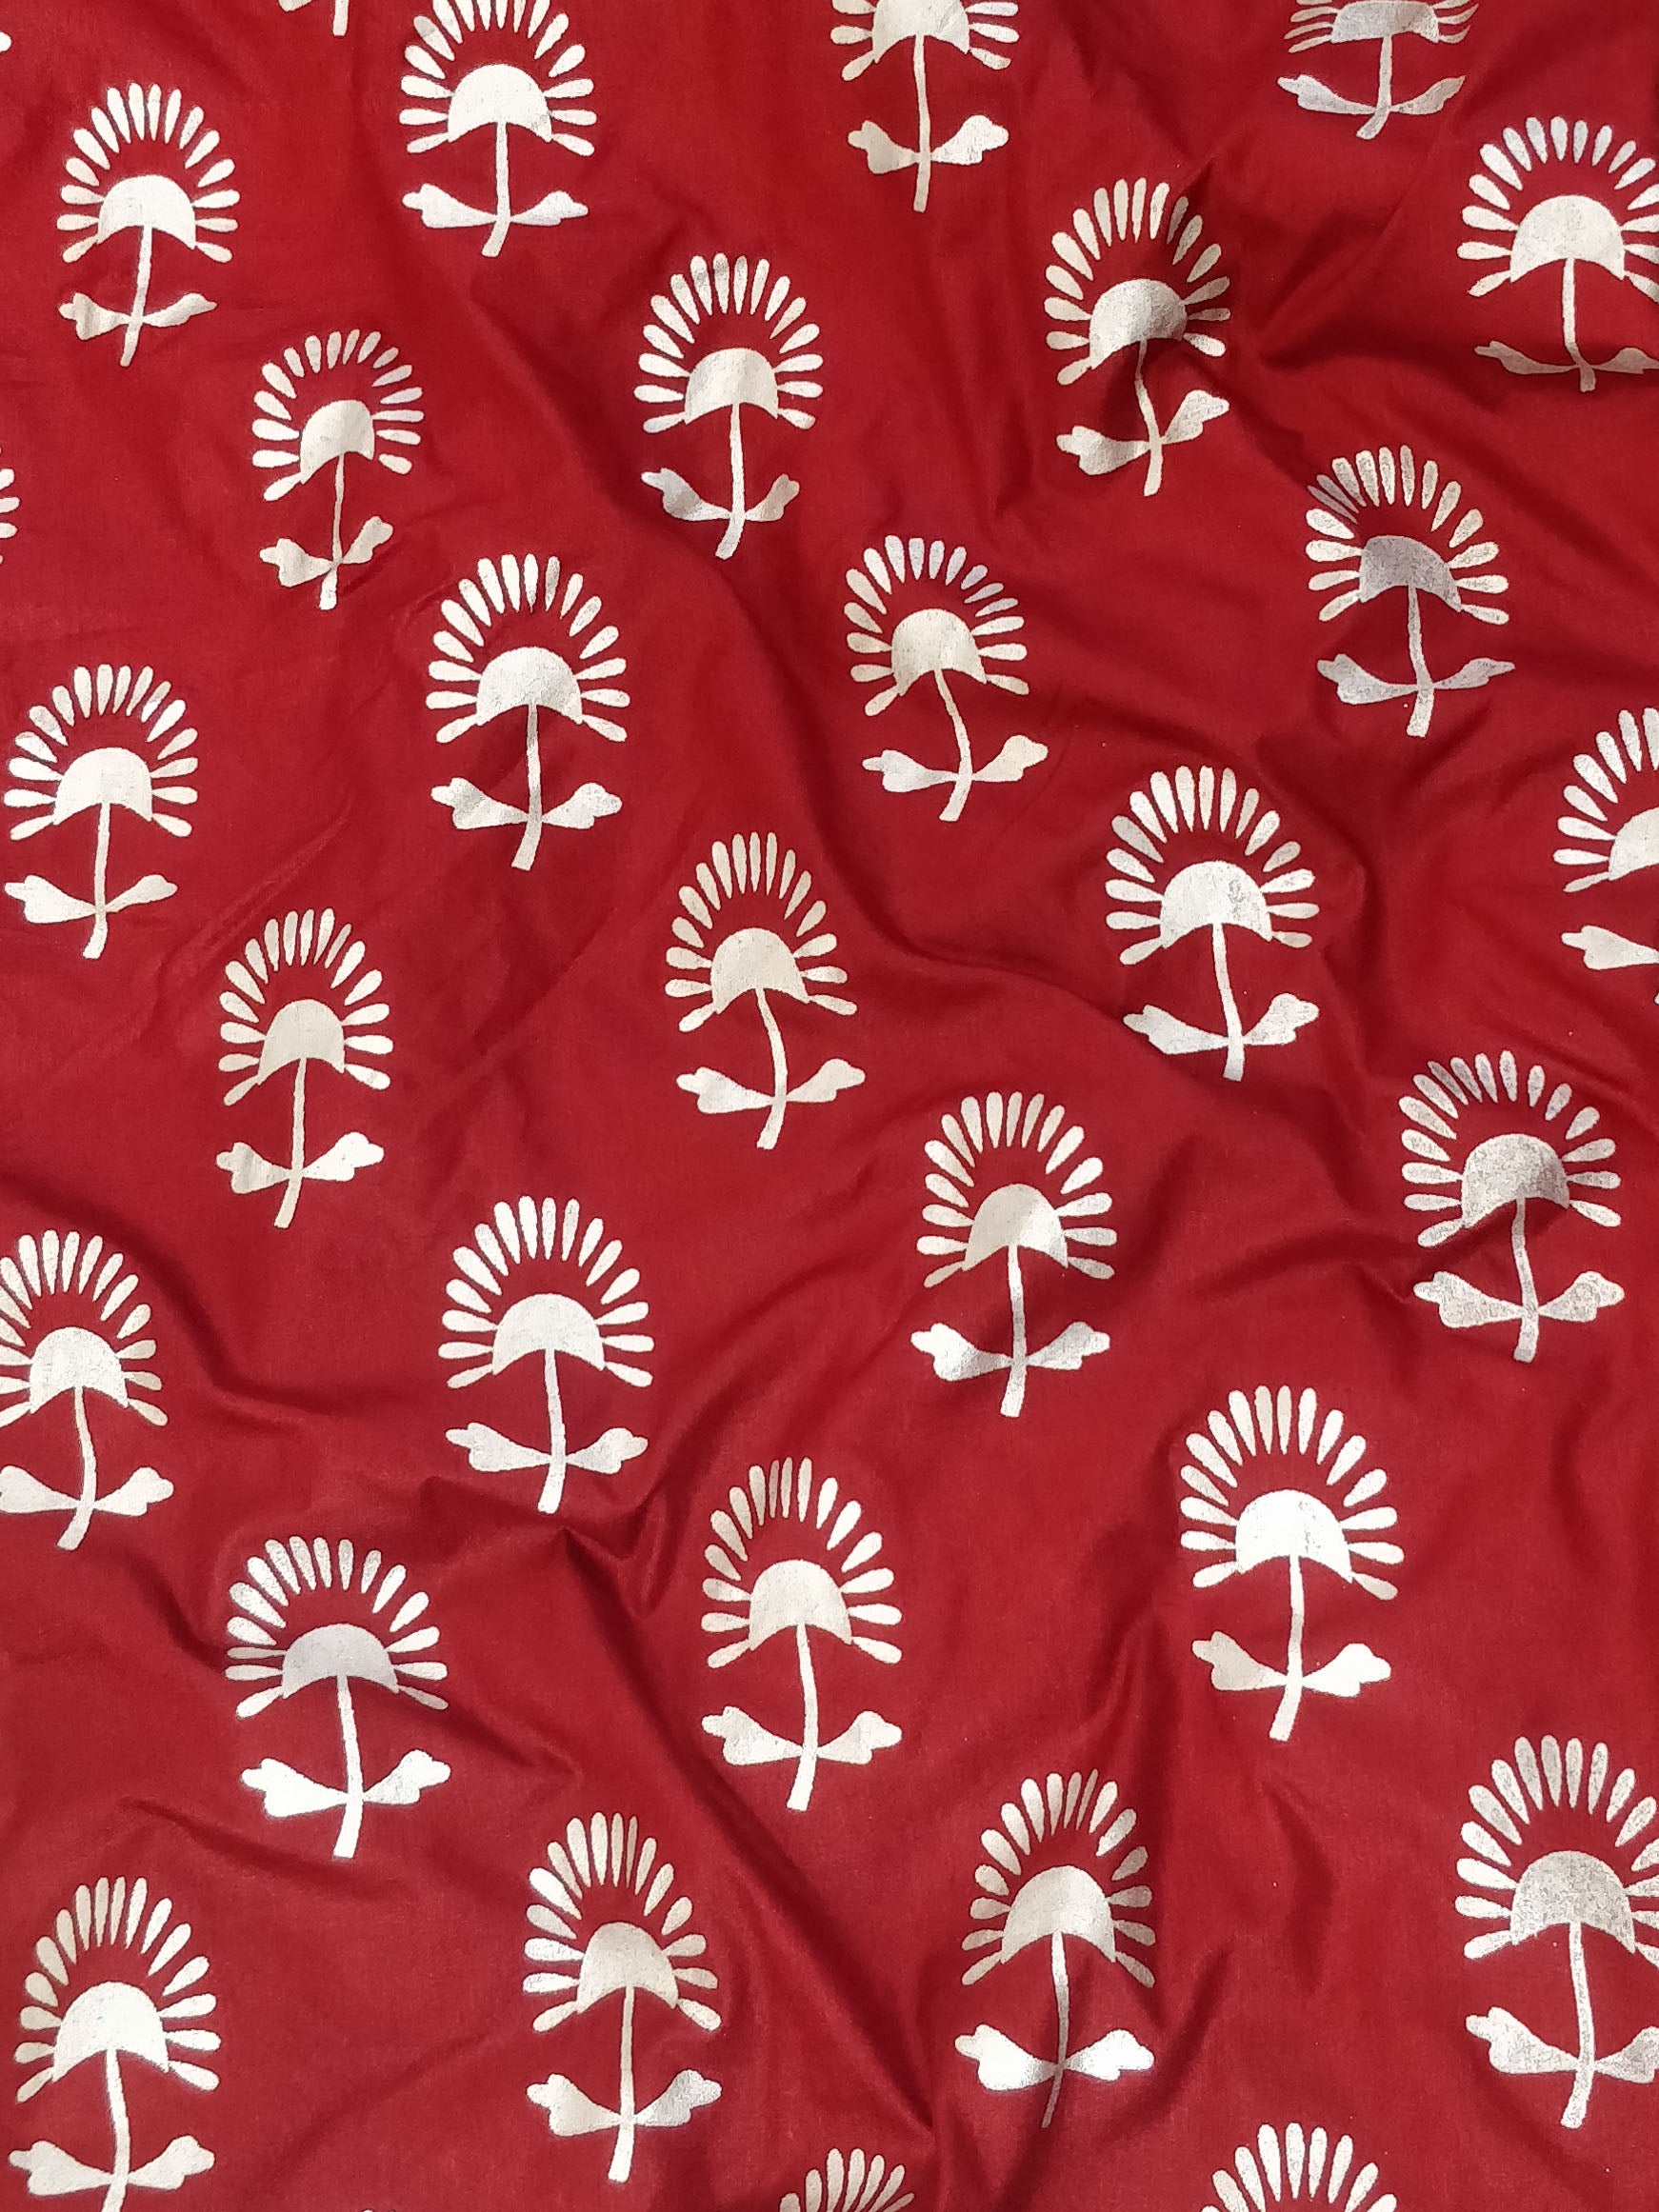 Banarasee Handloom Pure Linen By Tissue Saree With Maroon Silk Blouse-Silver